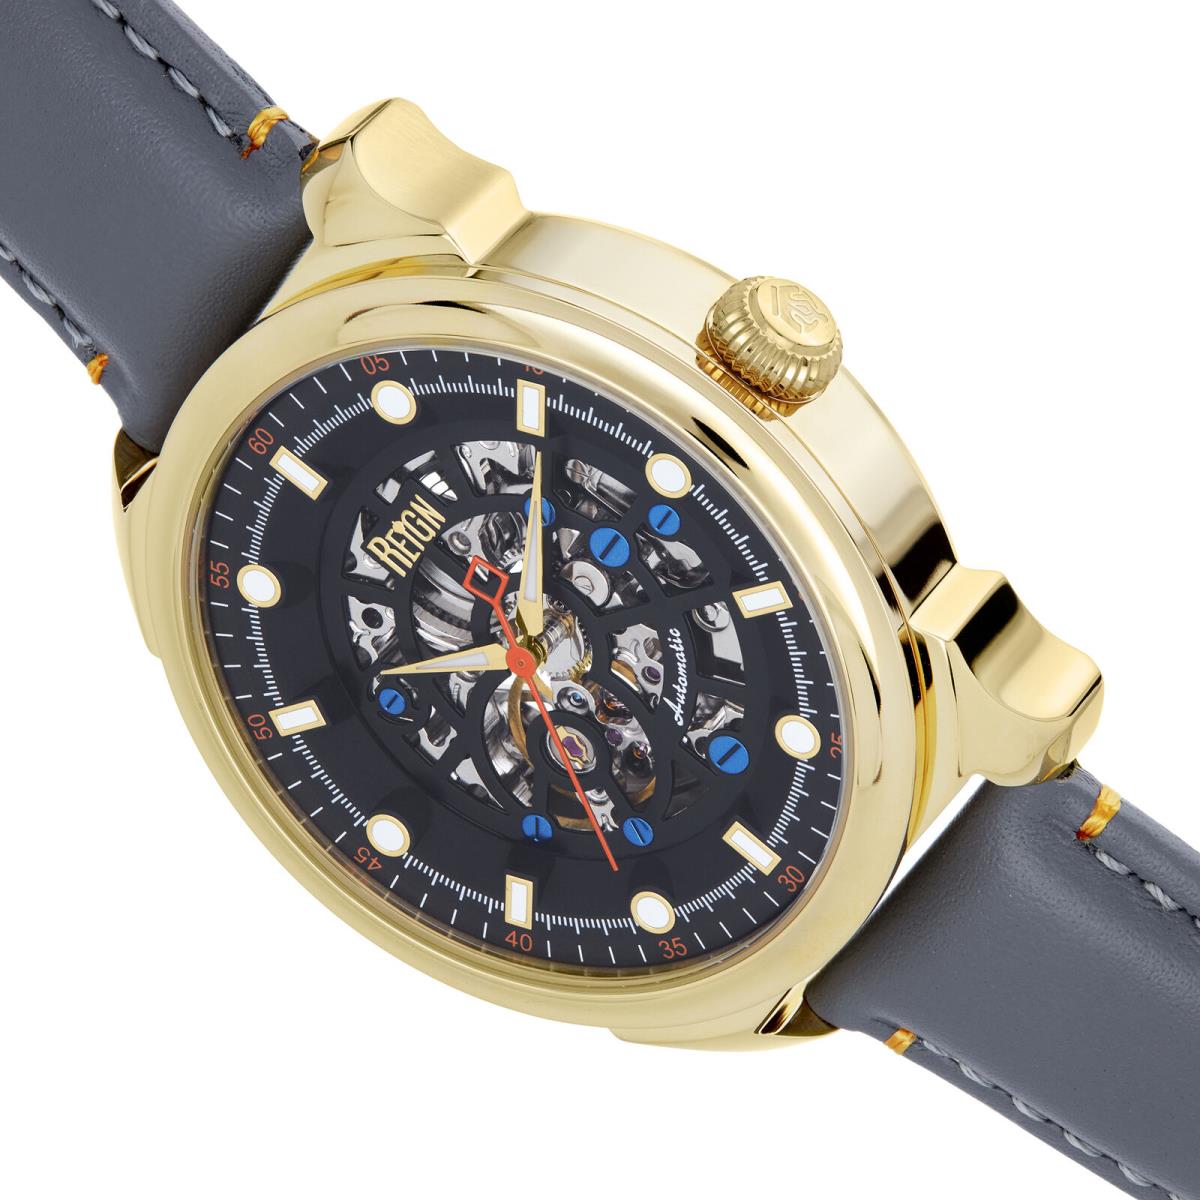 Reign Weston Automatic Skeletonized Leather-band Watch - Gold/grey